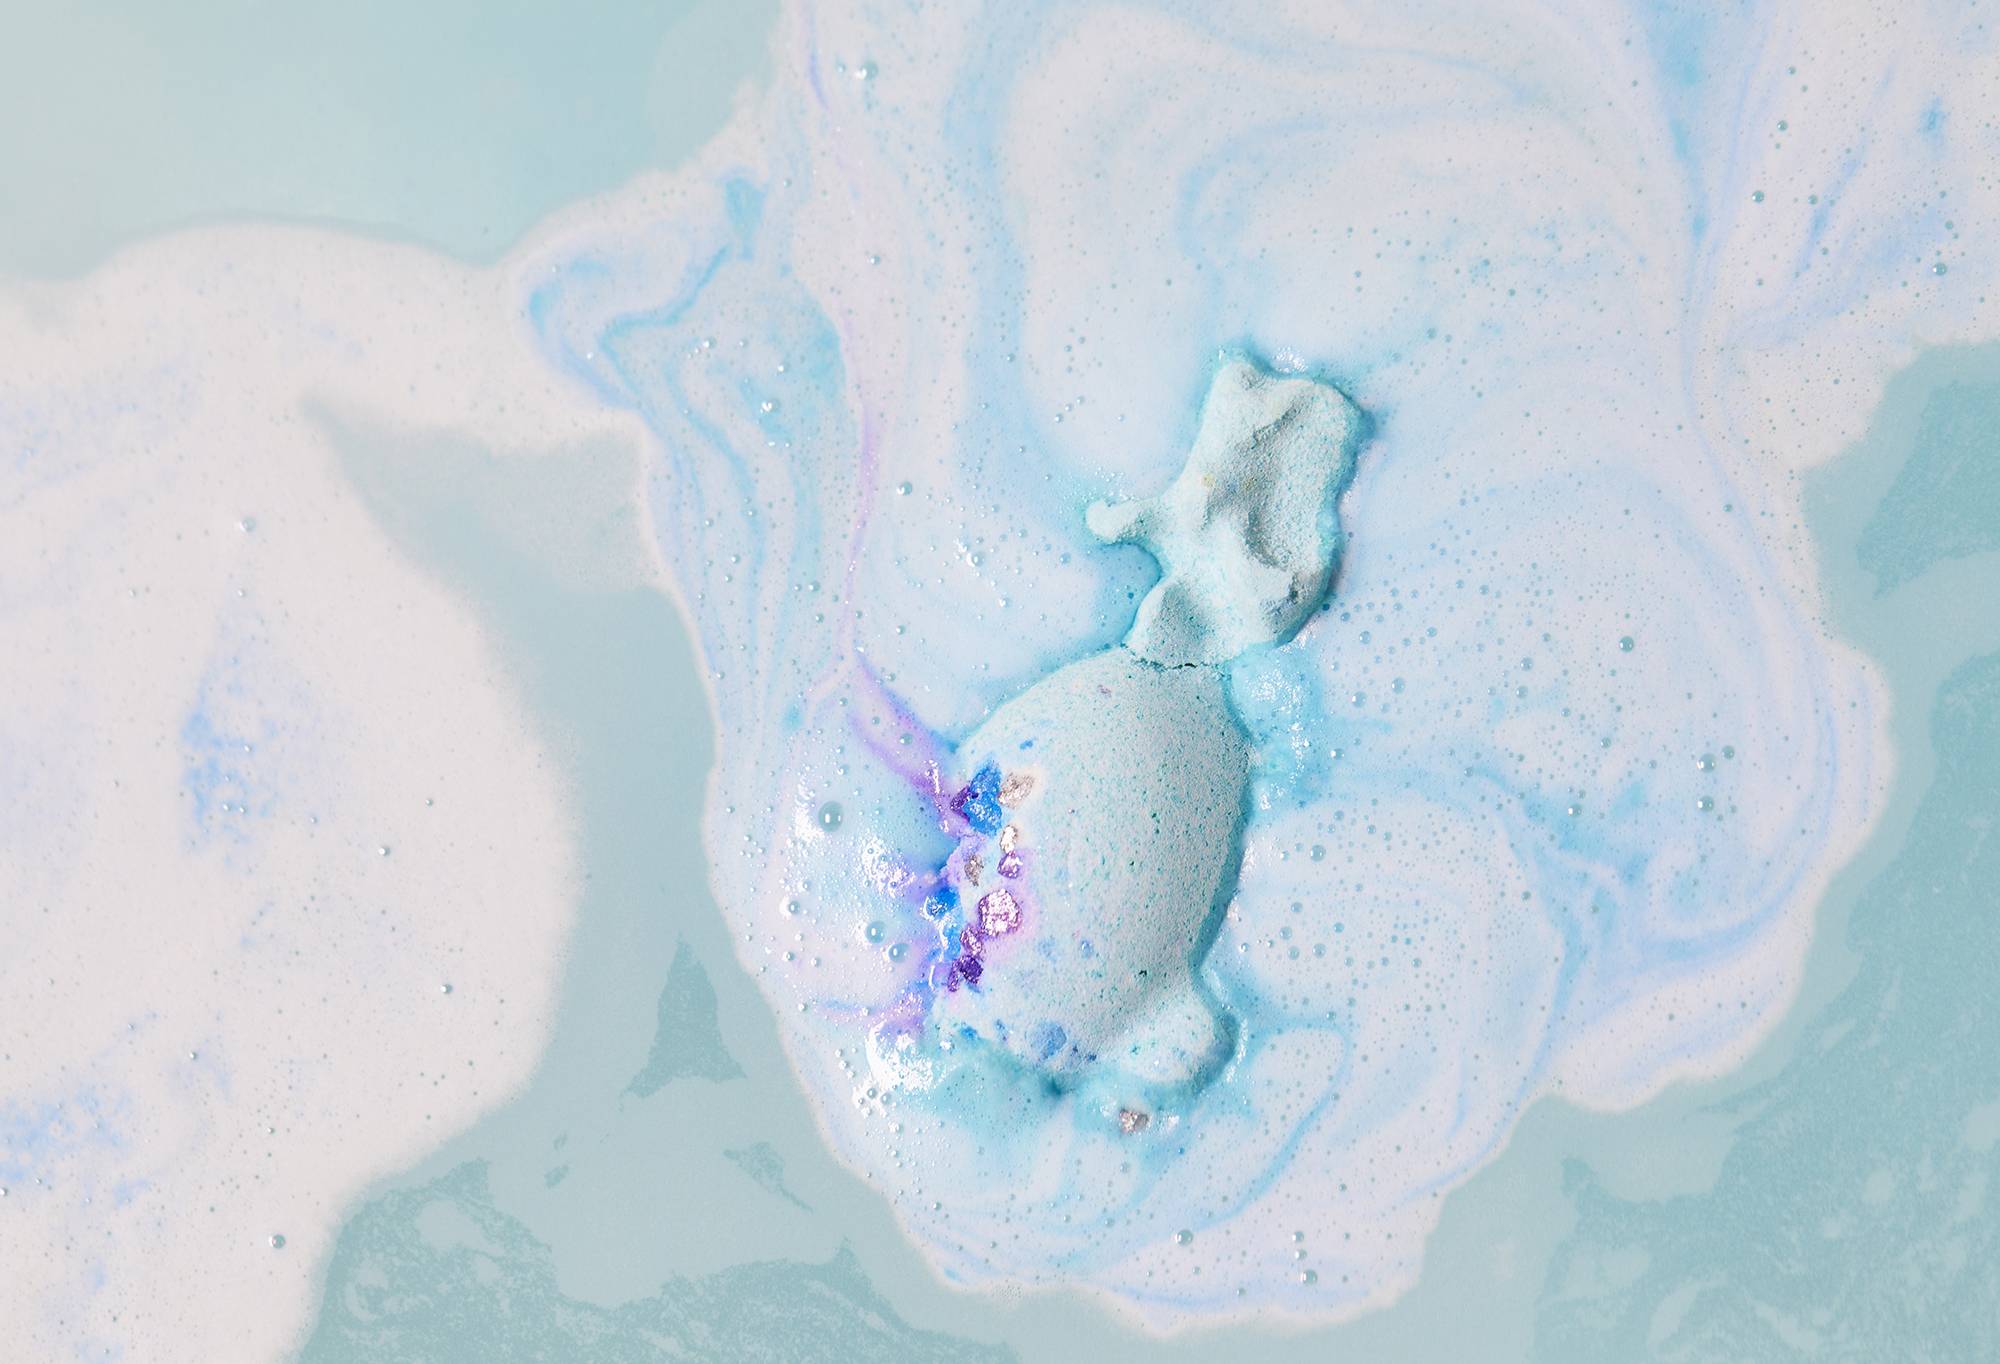 Snow Dragon bath bomb has almost fully dissolved leaving streaming swirls of blue and tiny twirls of purple.